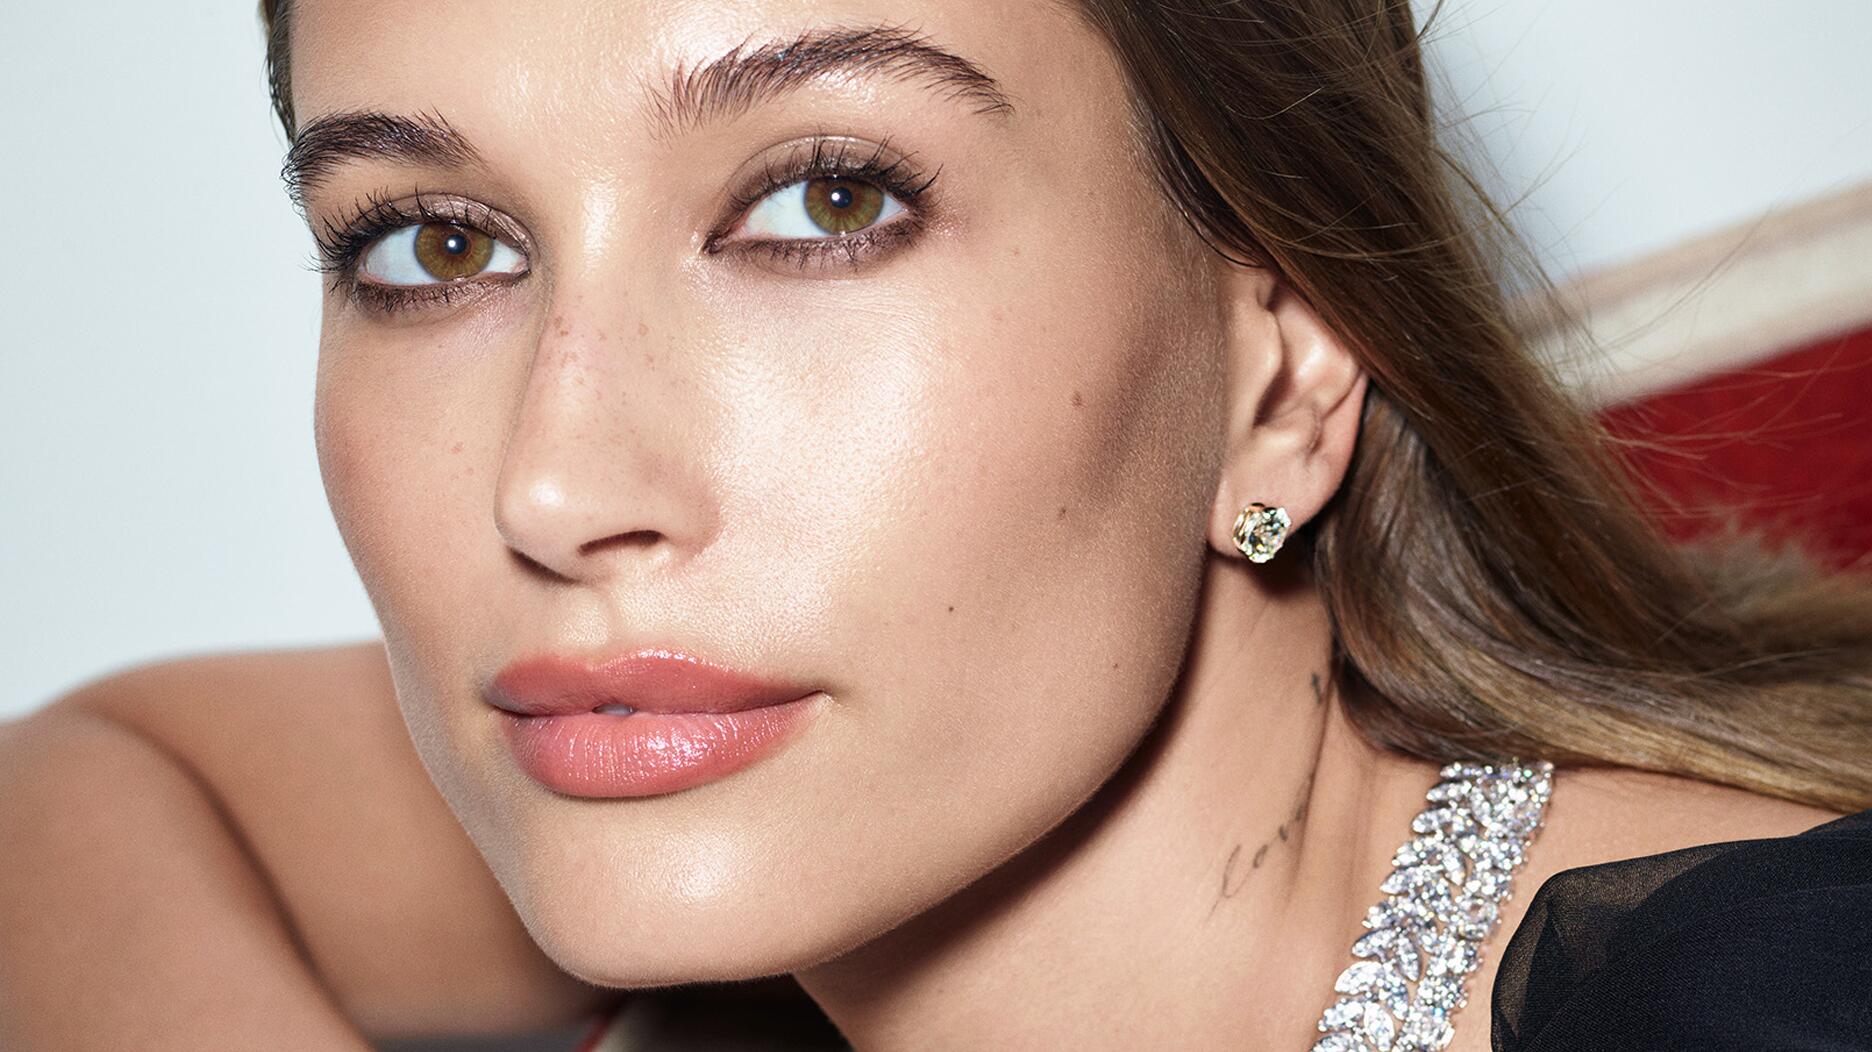 Hailey Bieber Stars in the New Tiffany & Co. Campaign